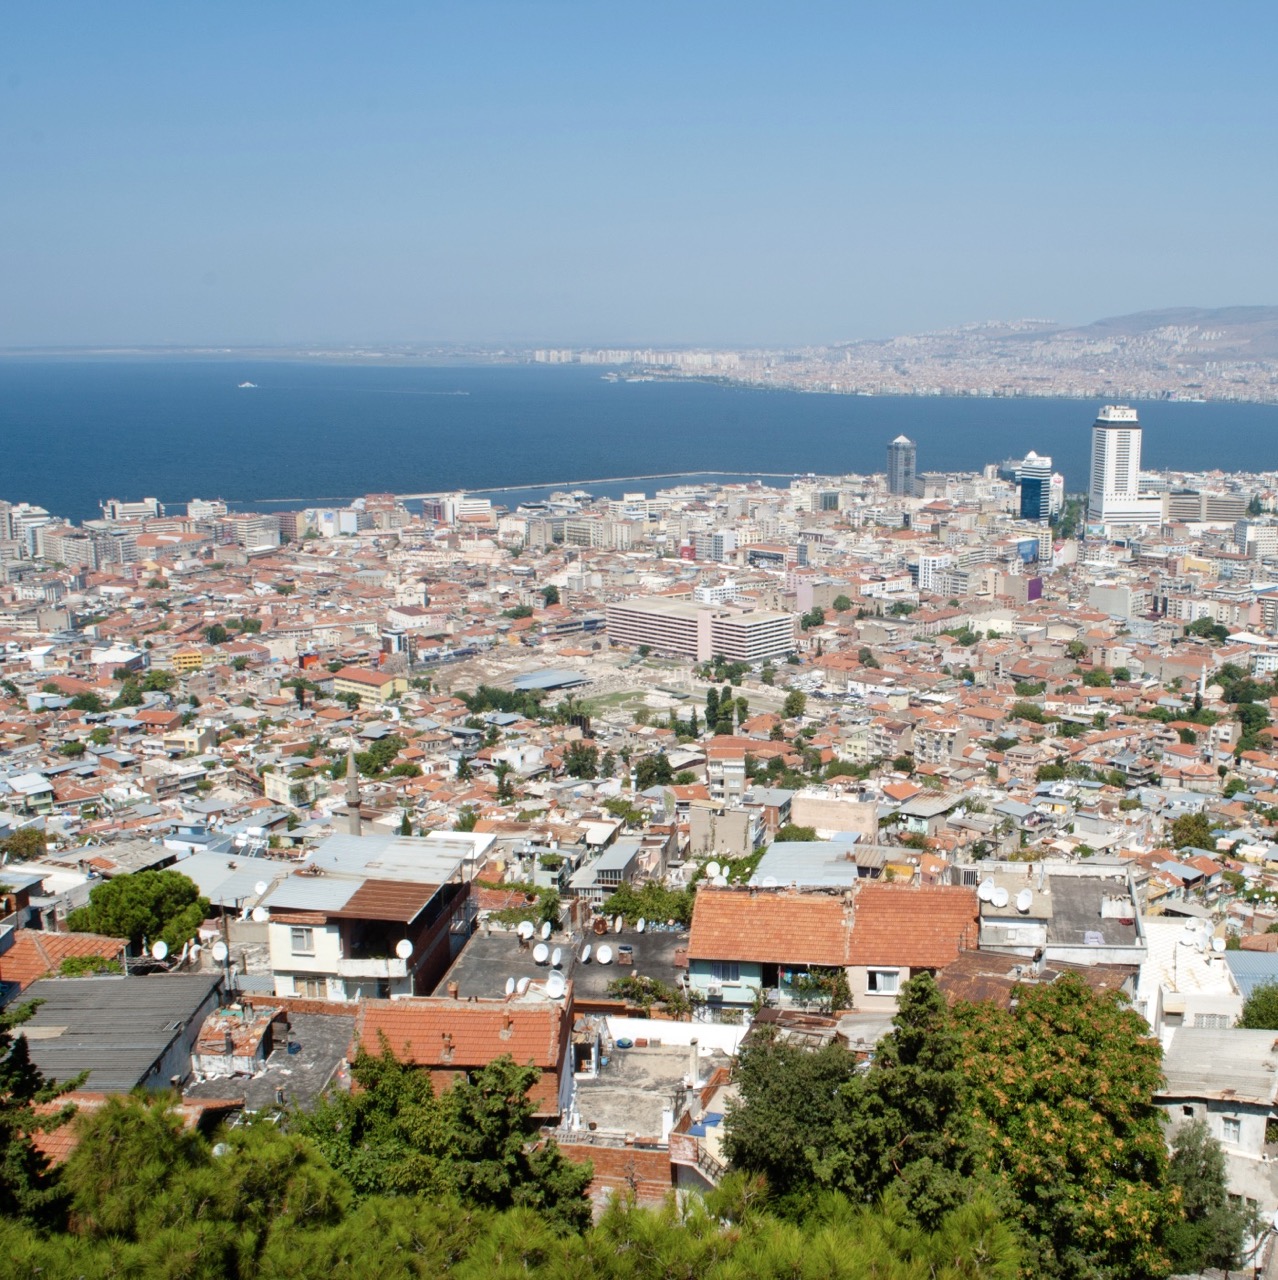 Izmir hava durumu of the the 3rd largest city in the Aegean region of Turkey in terms of population